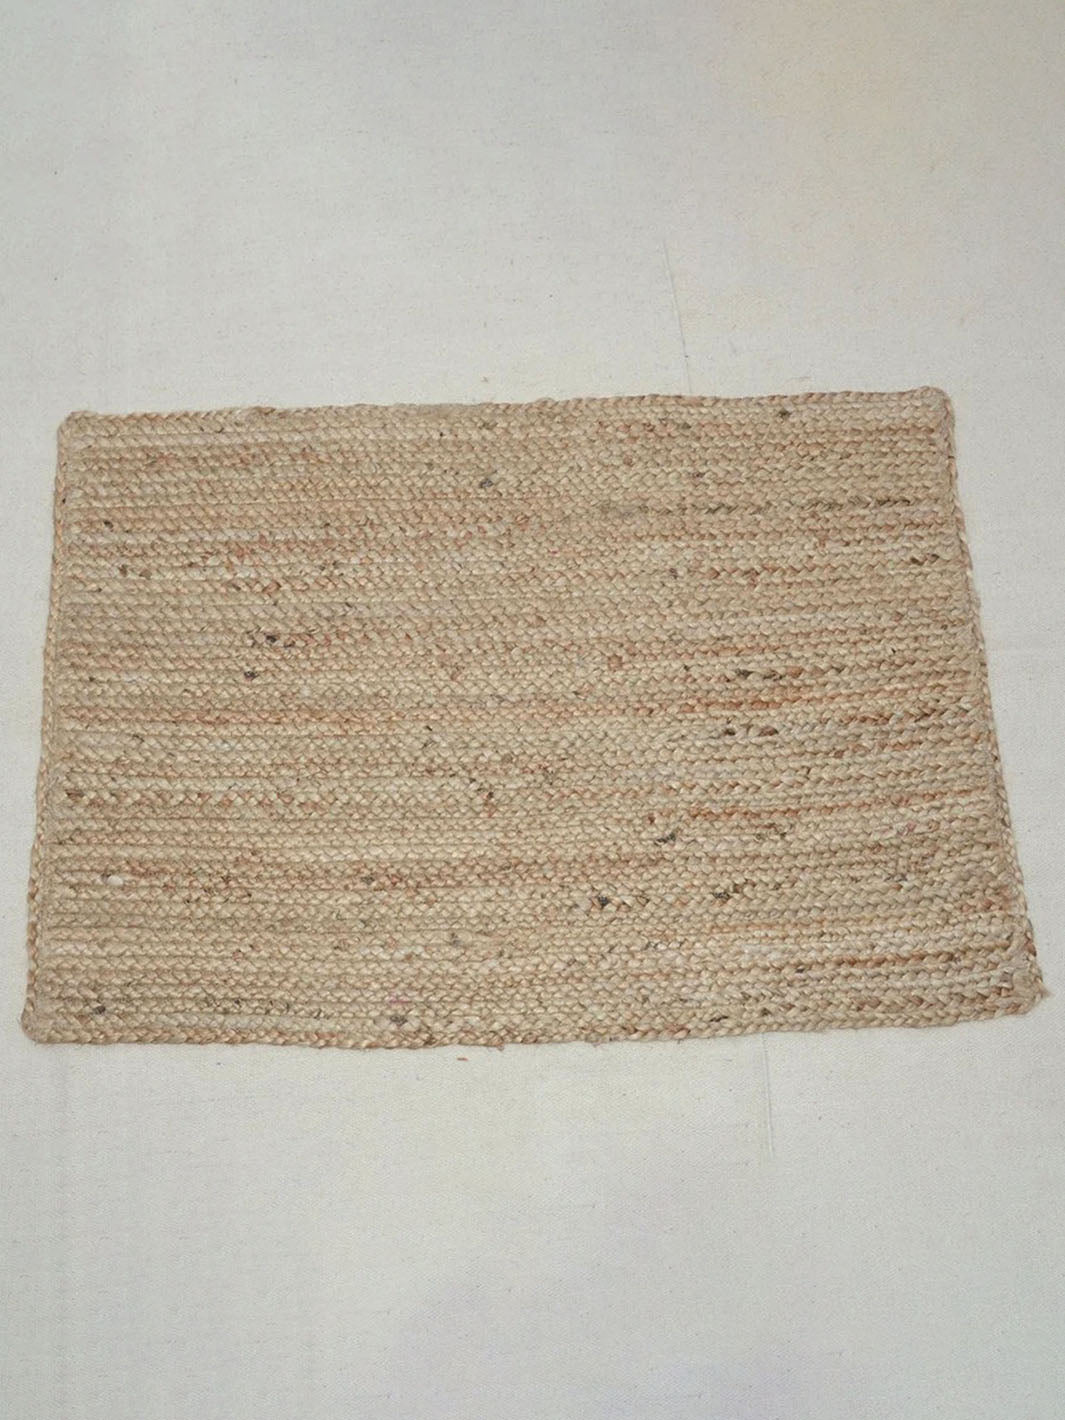 Handcrafted Braided Square Jute Rug Chouhan Rugs CRH0219-4